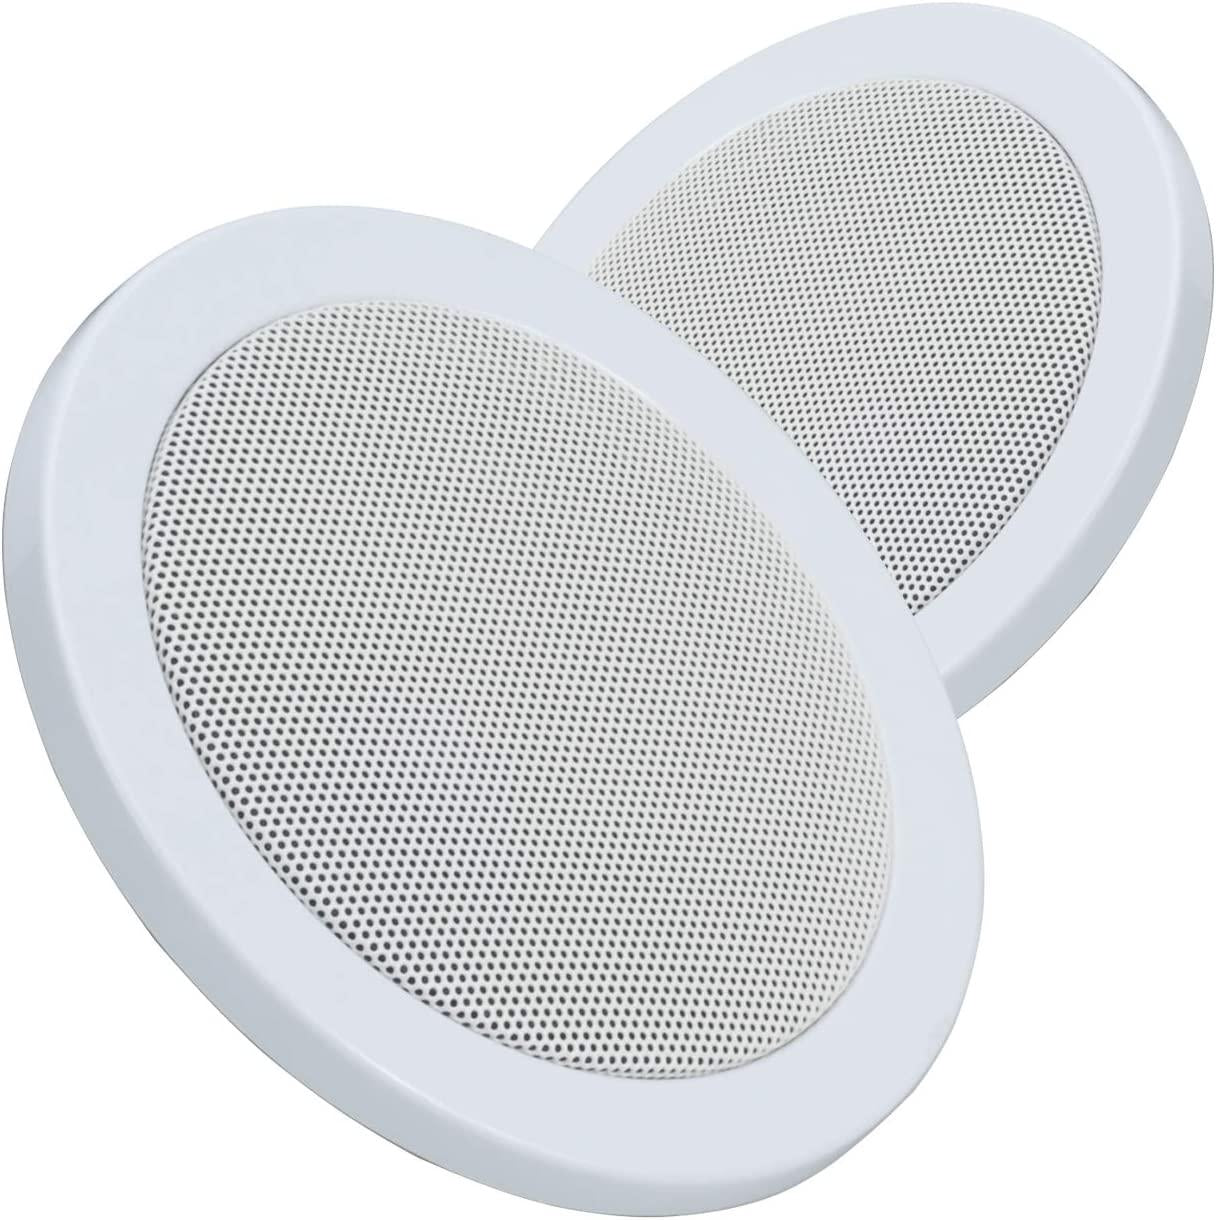 Magnadyne, Magnadyne SK525TL 10 Watt Coaxial Speakers 5 1/4 inch Dual Cone with Grill 1 Pair - White